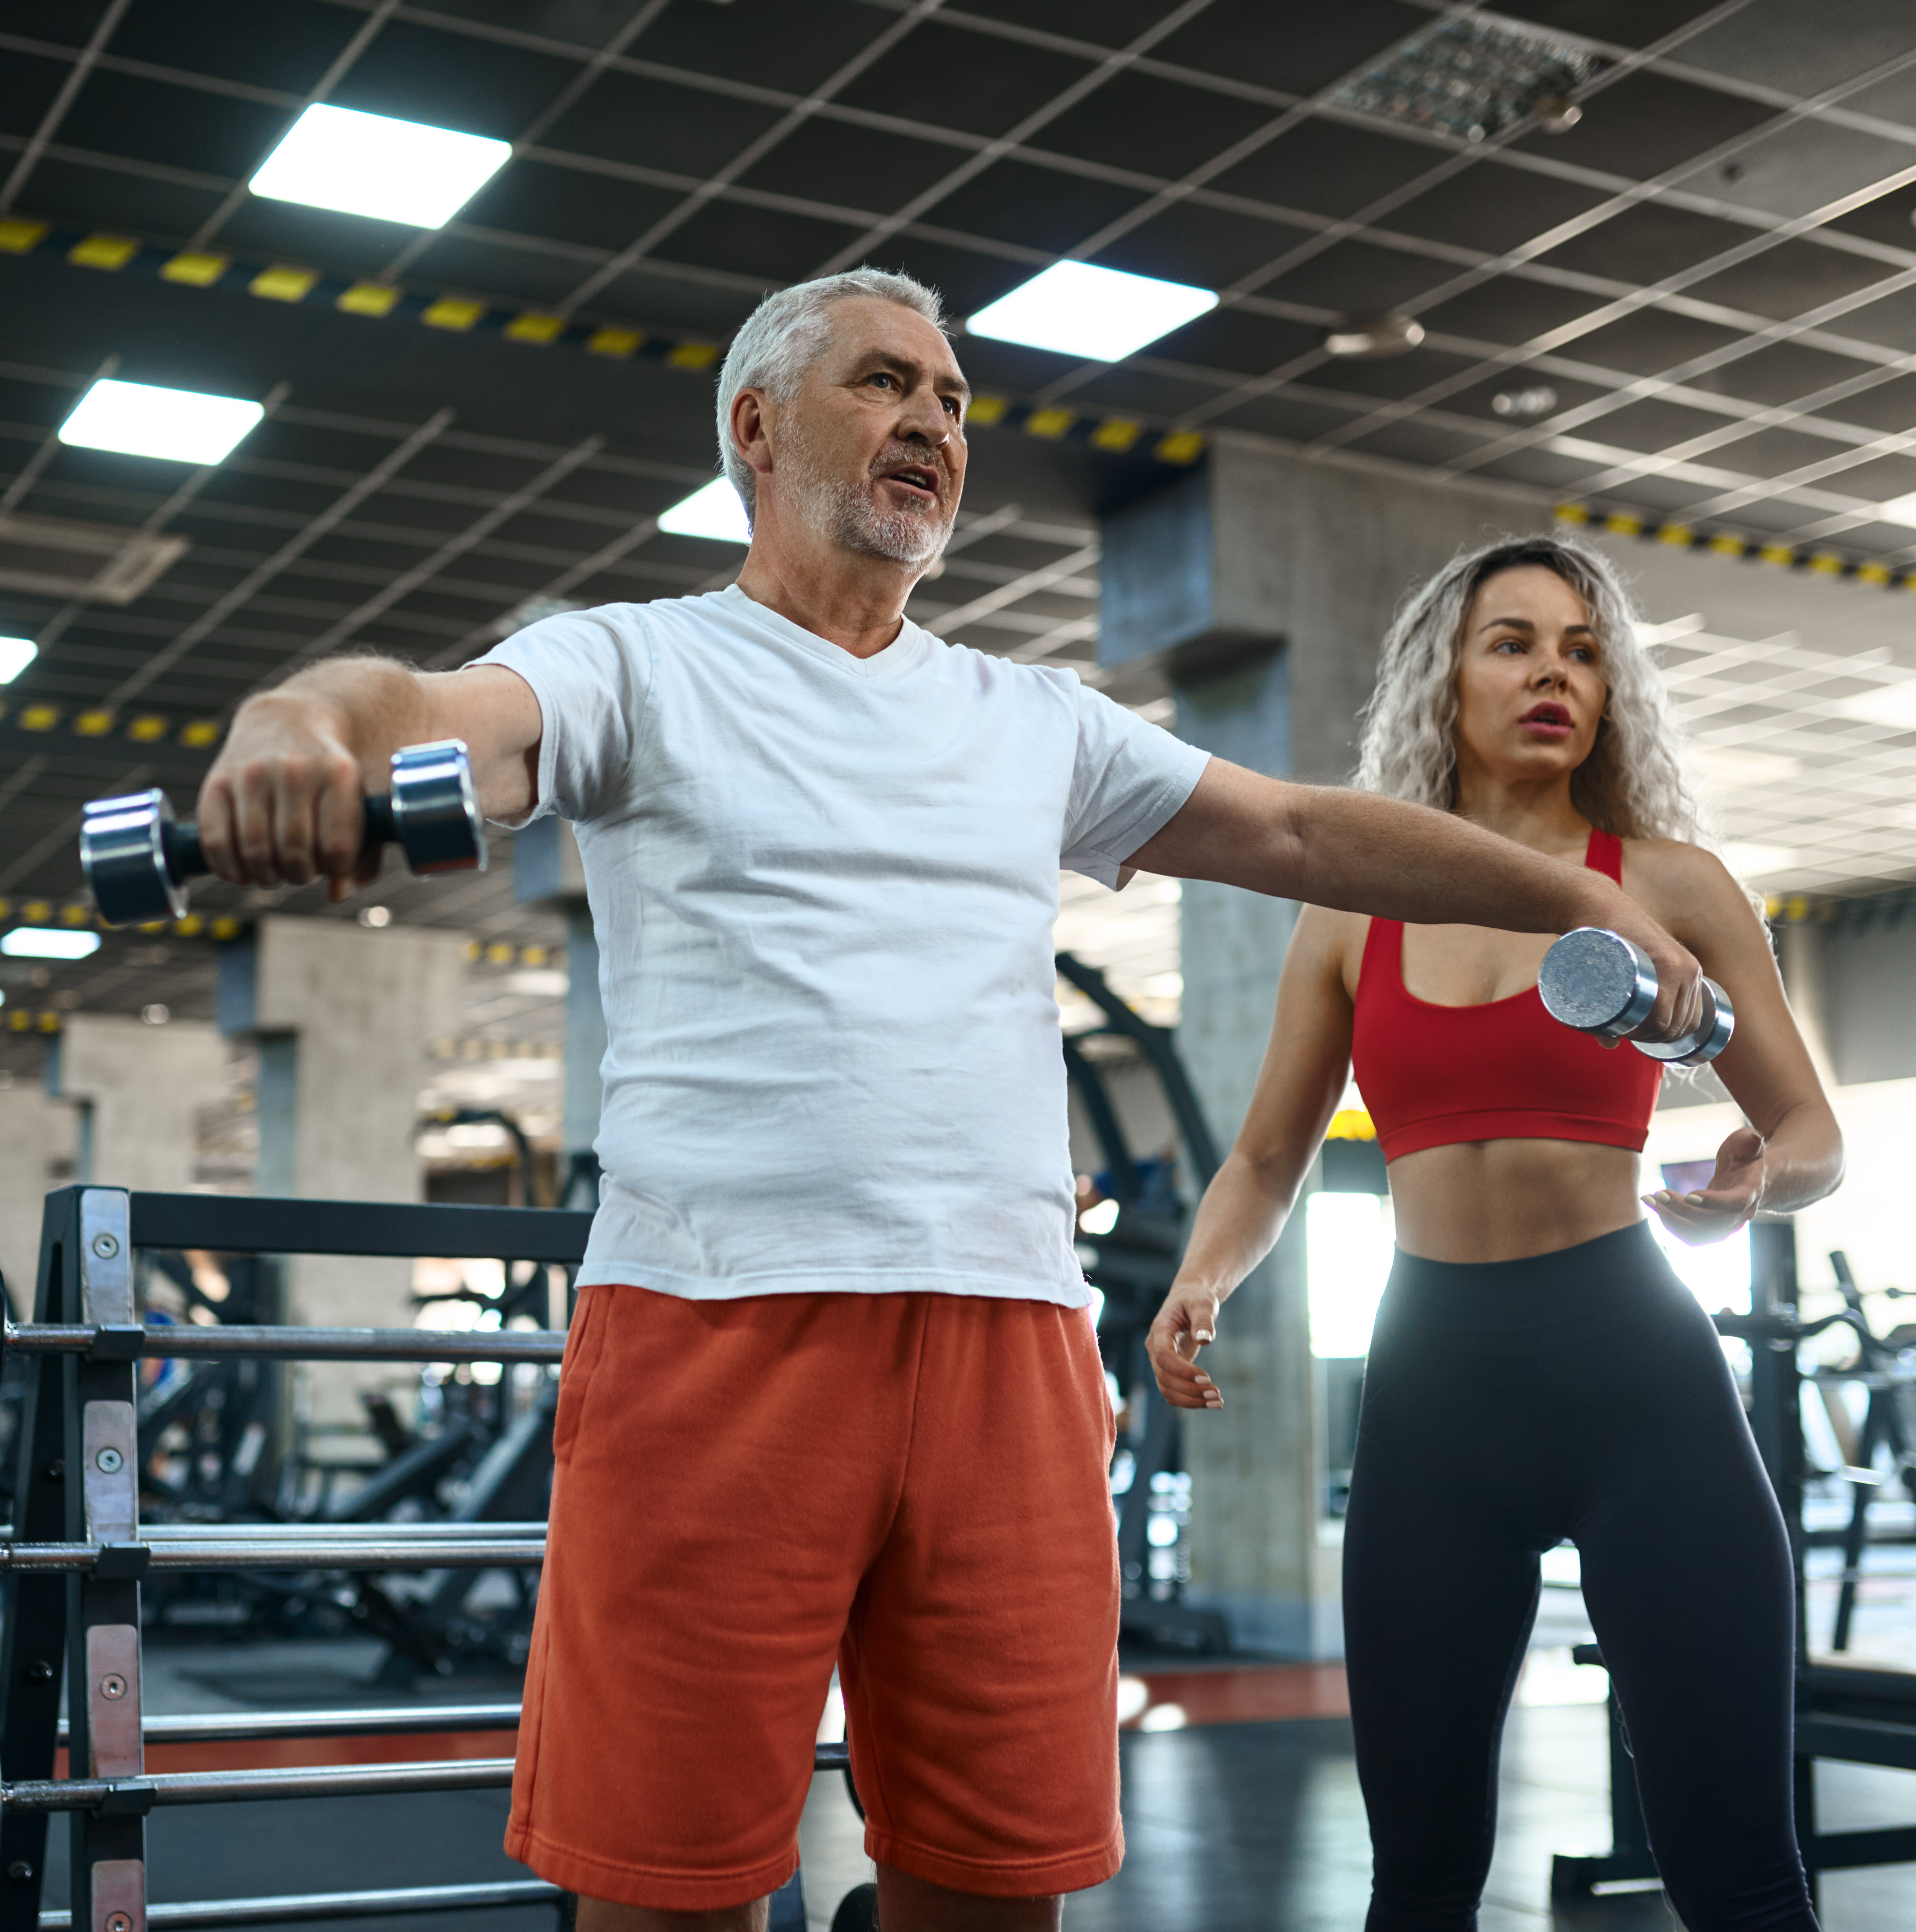 Old man doing exercise with dumbbells, female personal trainer, gym interior on background. Sportive grandpa with woman instructor, training in sport center